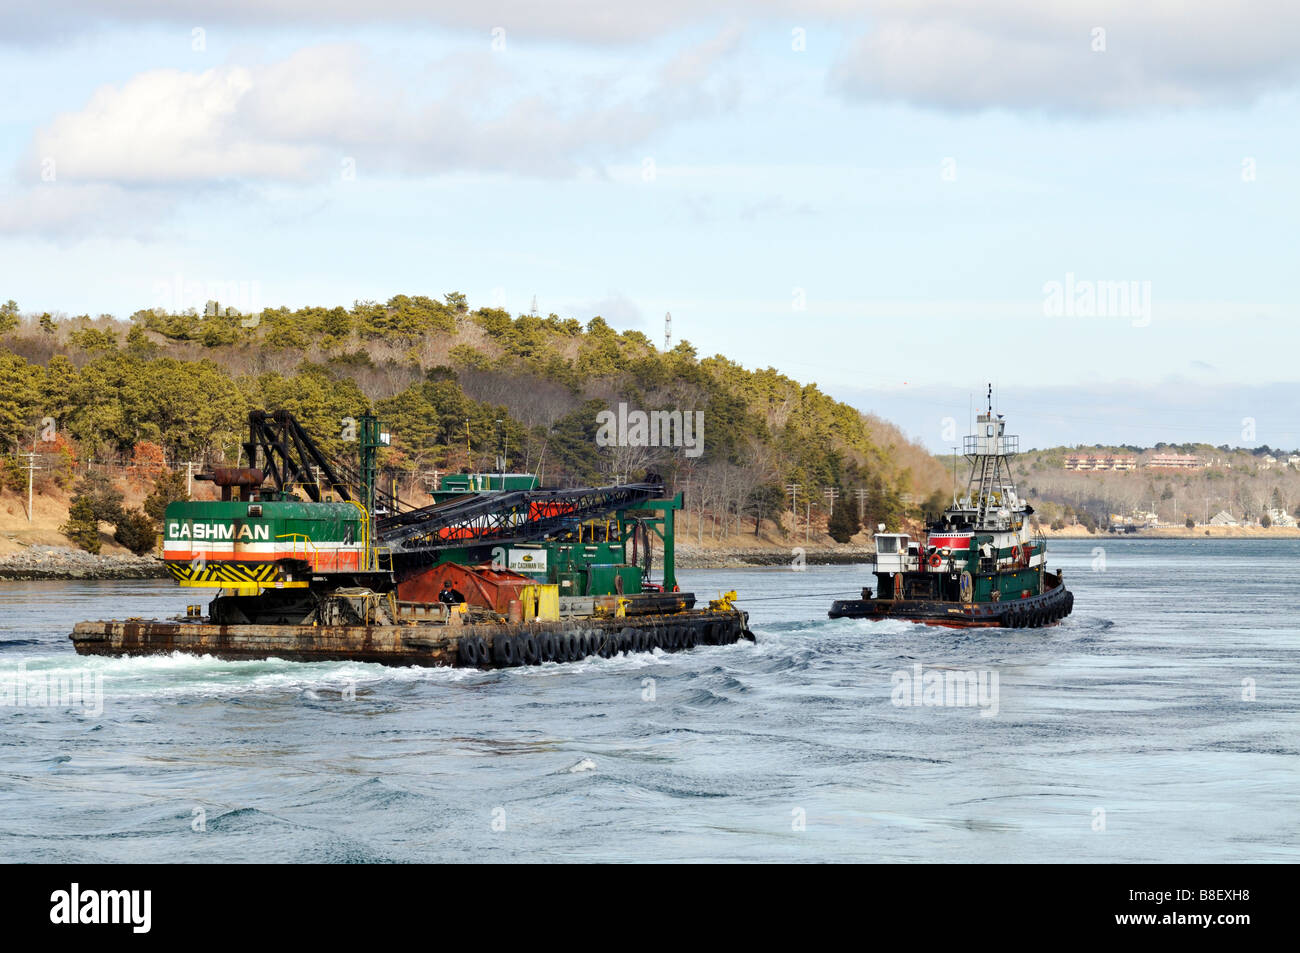 Tugboat towing a barge with crane and heavy equipment from Cashman Company through the Cape Cod Canal Stock Photo